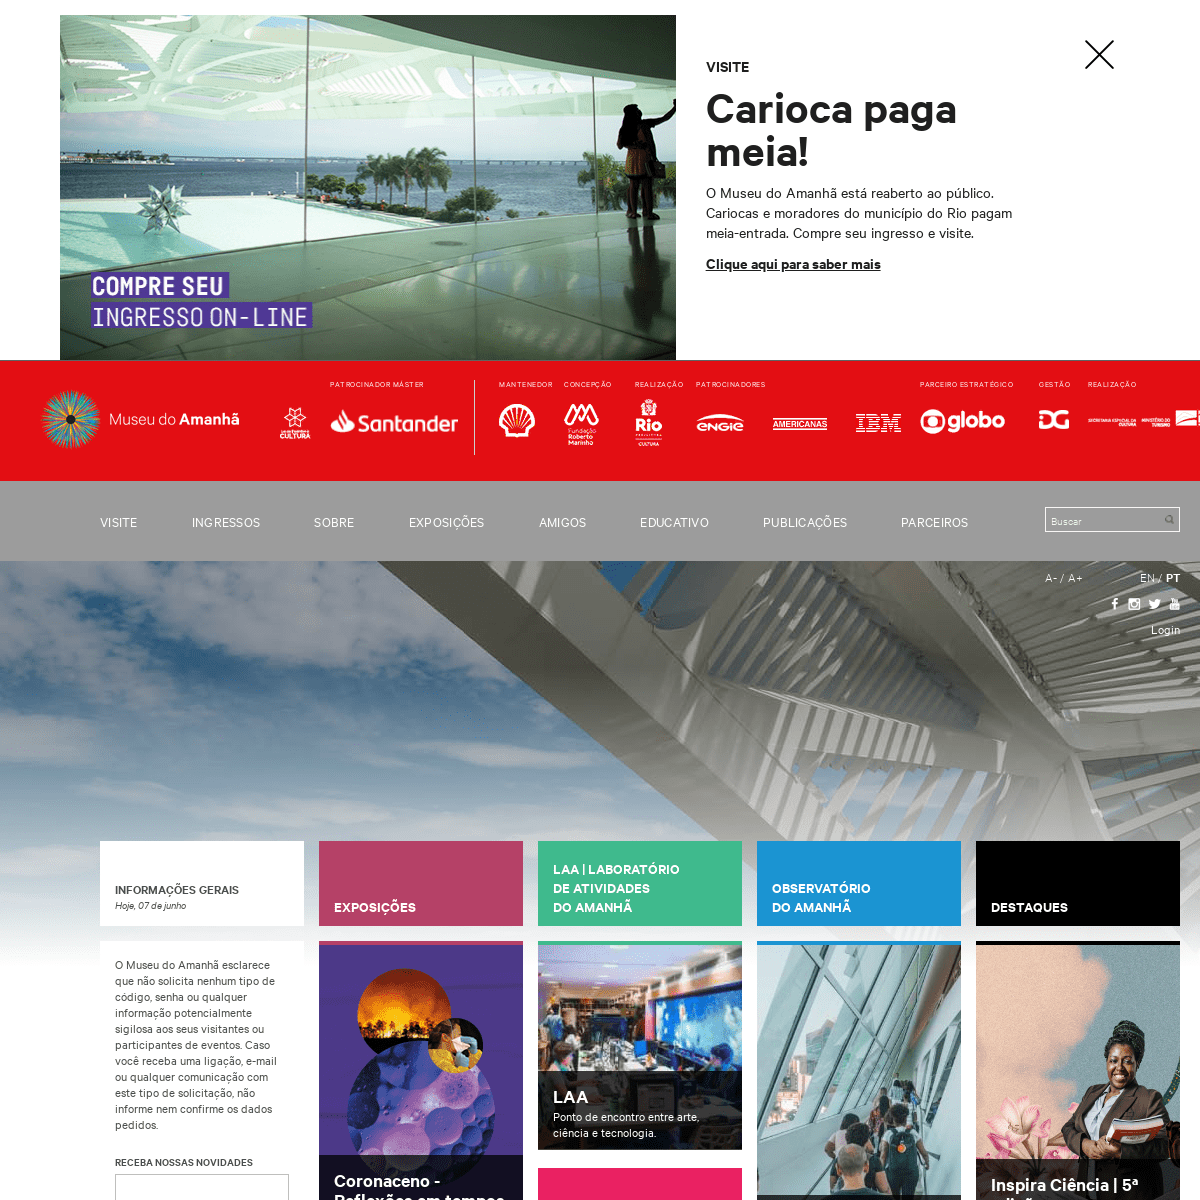 A complete backup of https://museudoamanha.org.br